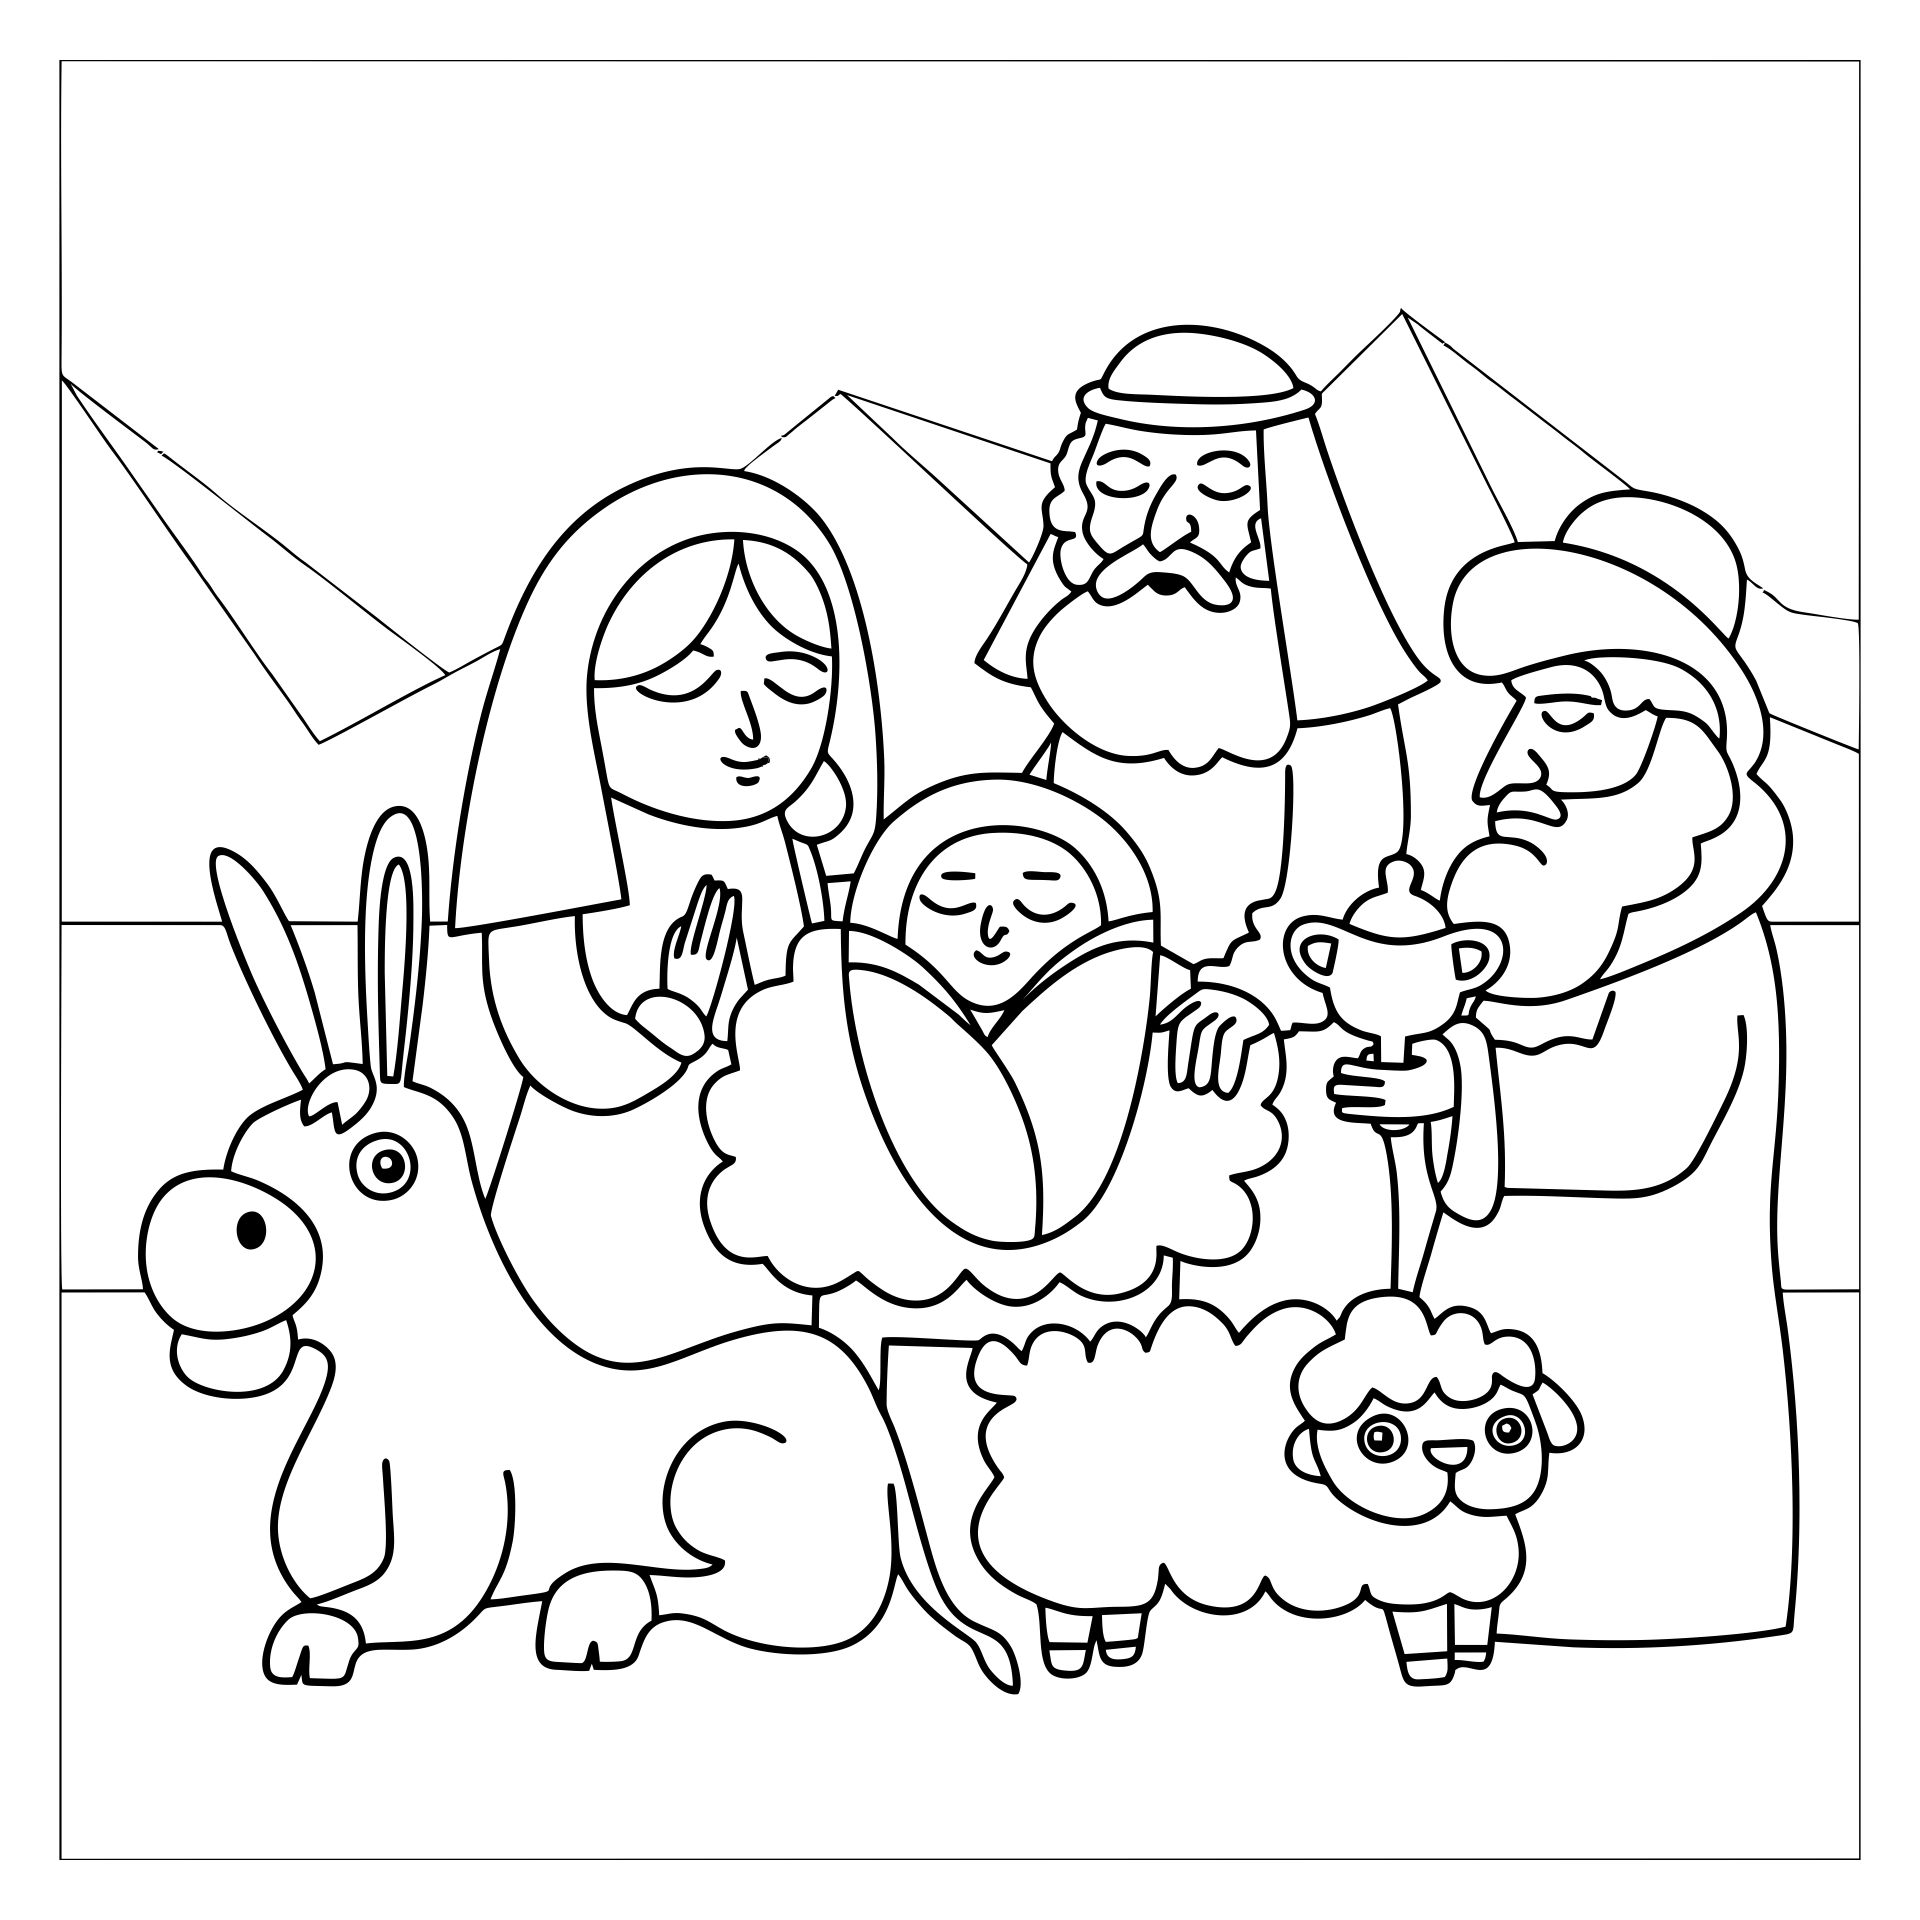 10-best-nativity-story-printable-book-for-free-at-printablee